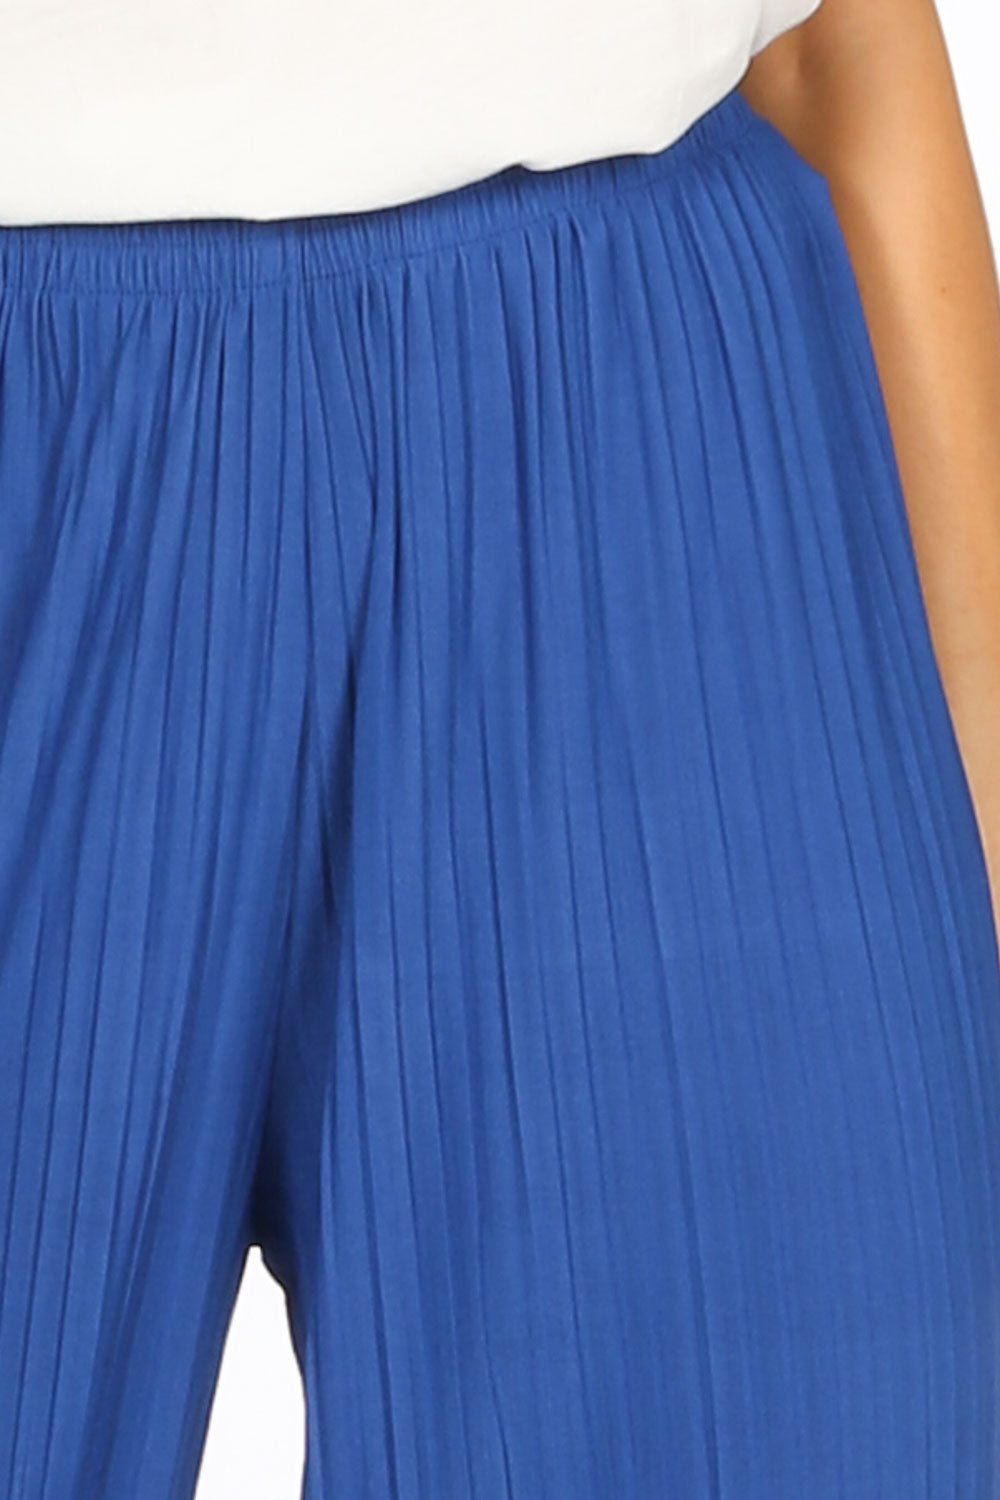 Cobalt Blue Pleated Palazzo Trouser